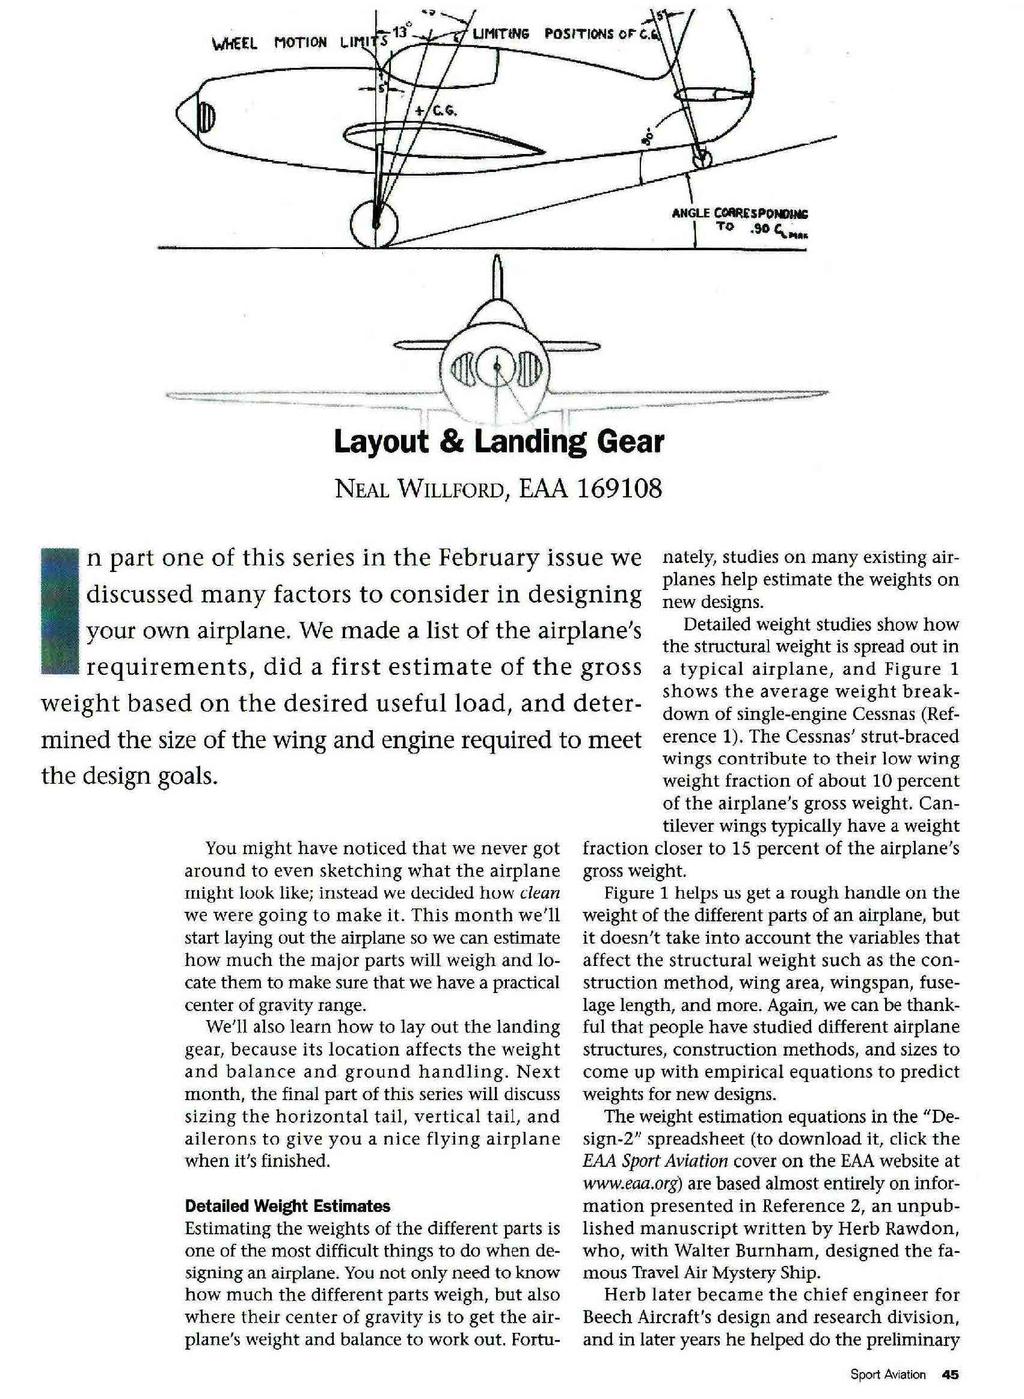 WHEEL Layout & Landing Gear NEAL WILLFORD, EAA 169108 In part one of this series in the February issue we discussed many factors to consider in designing your own airplane.